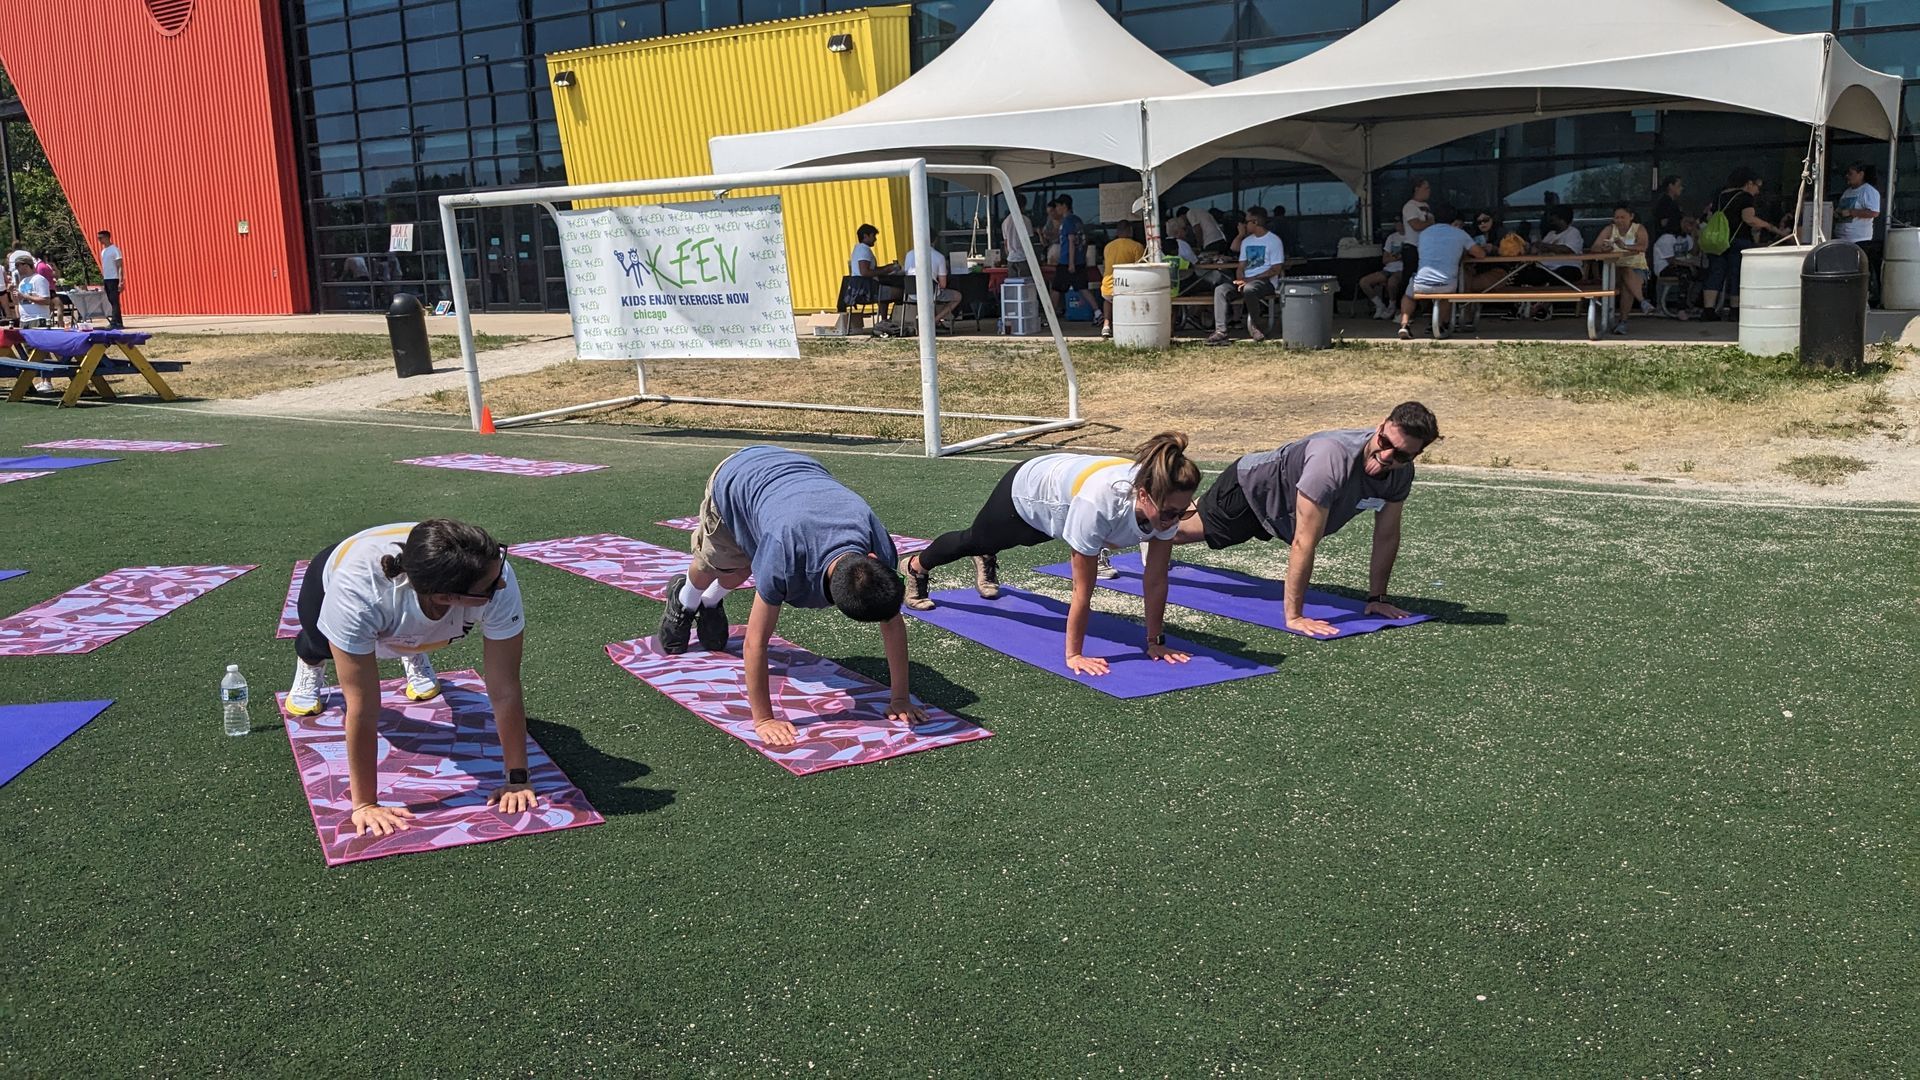 4 attendees do yoga together